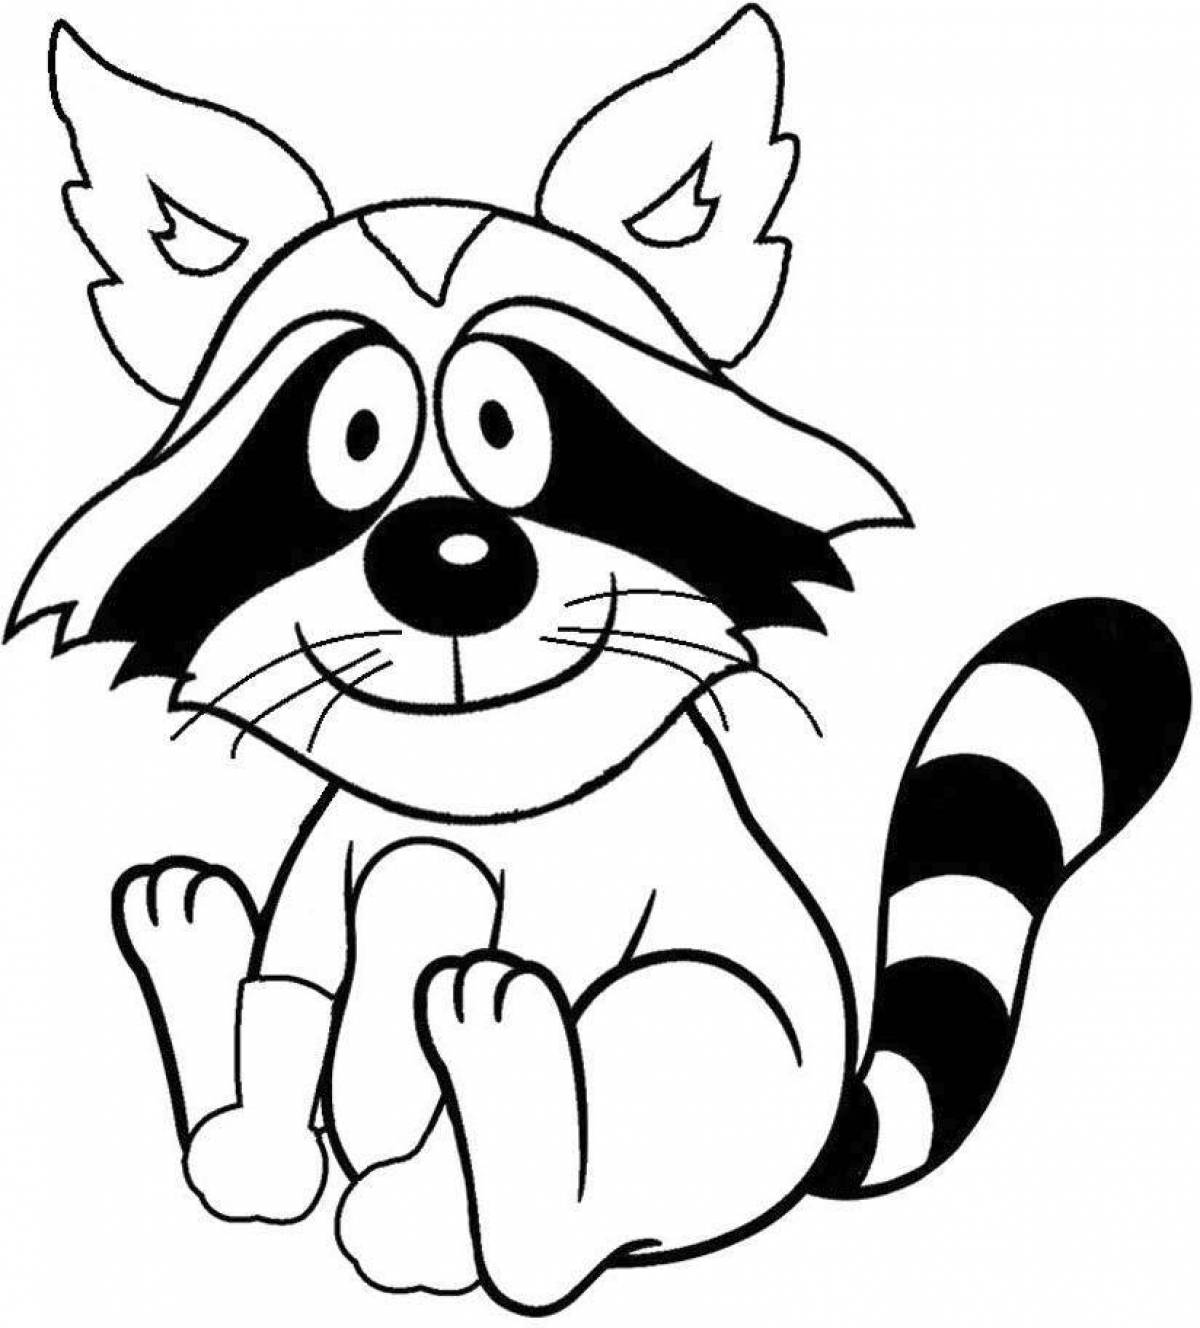 Coloring page funny raccoon